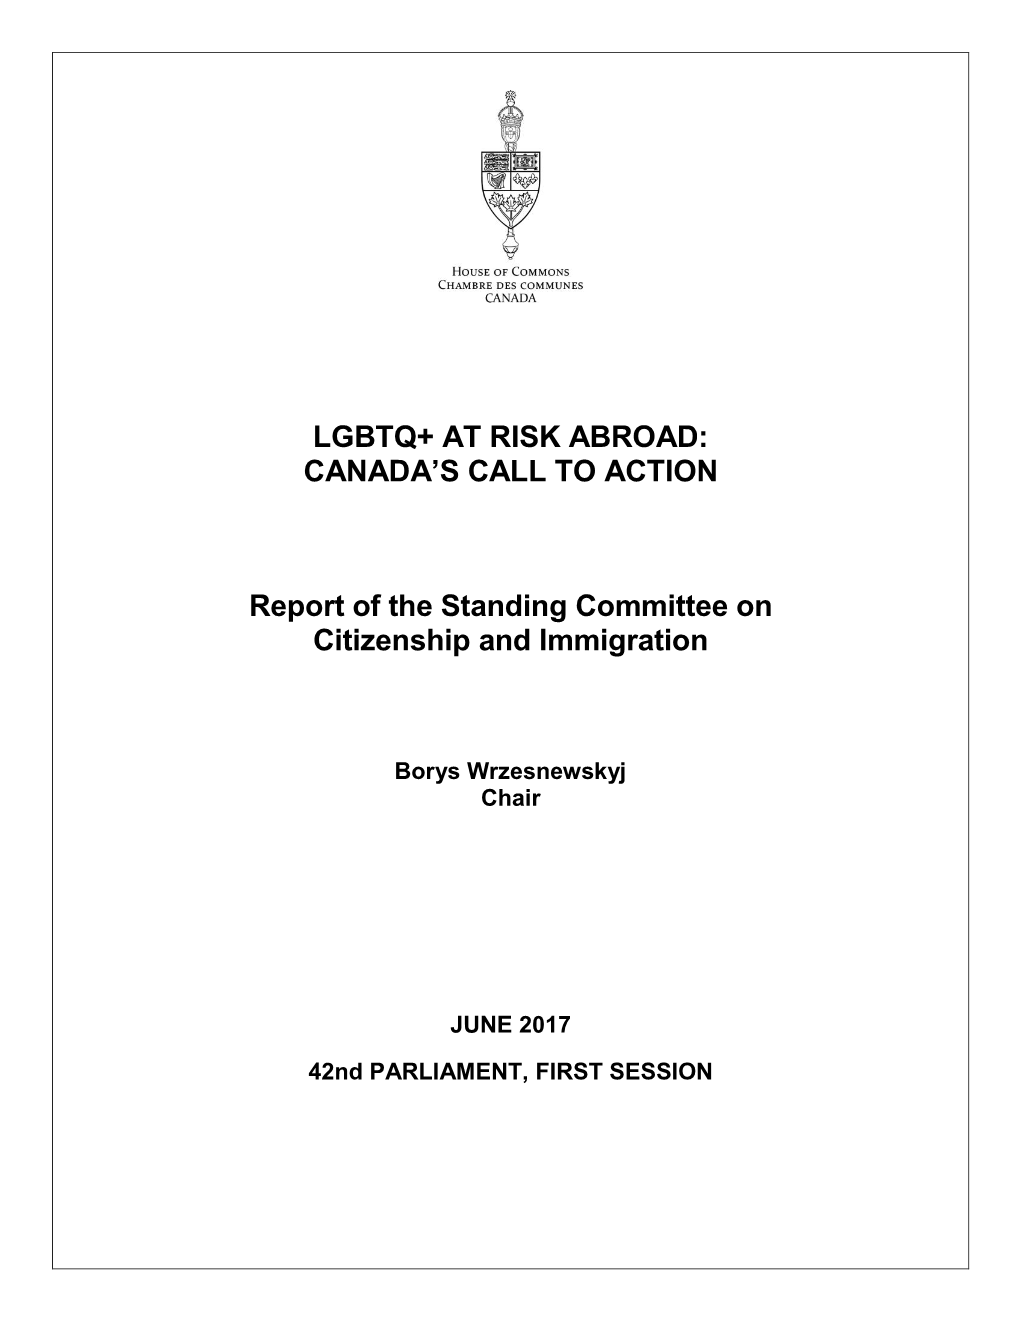 CIMM Report on LGBTQ+ at Risk Abroad and Canada's Call to Action